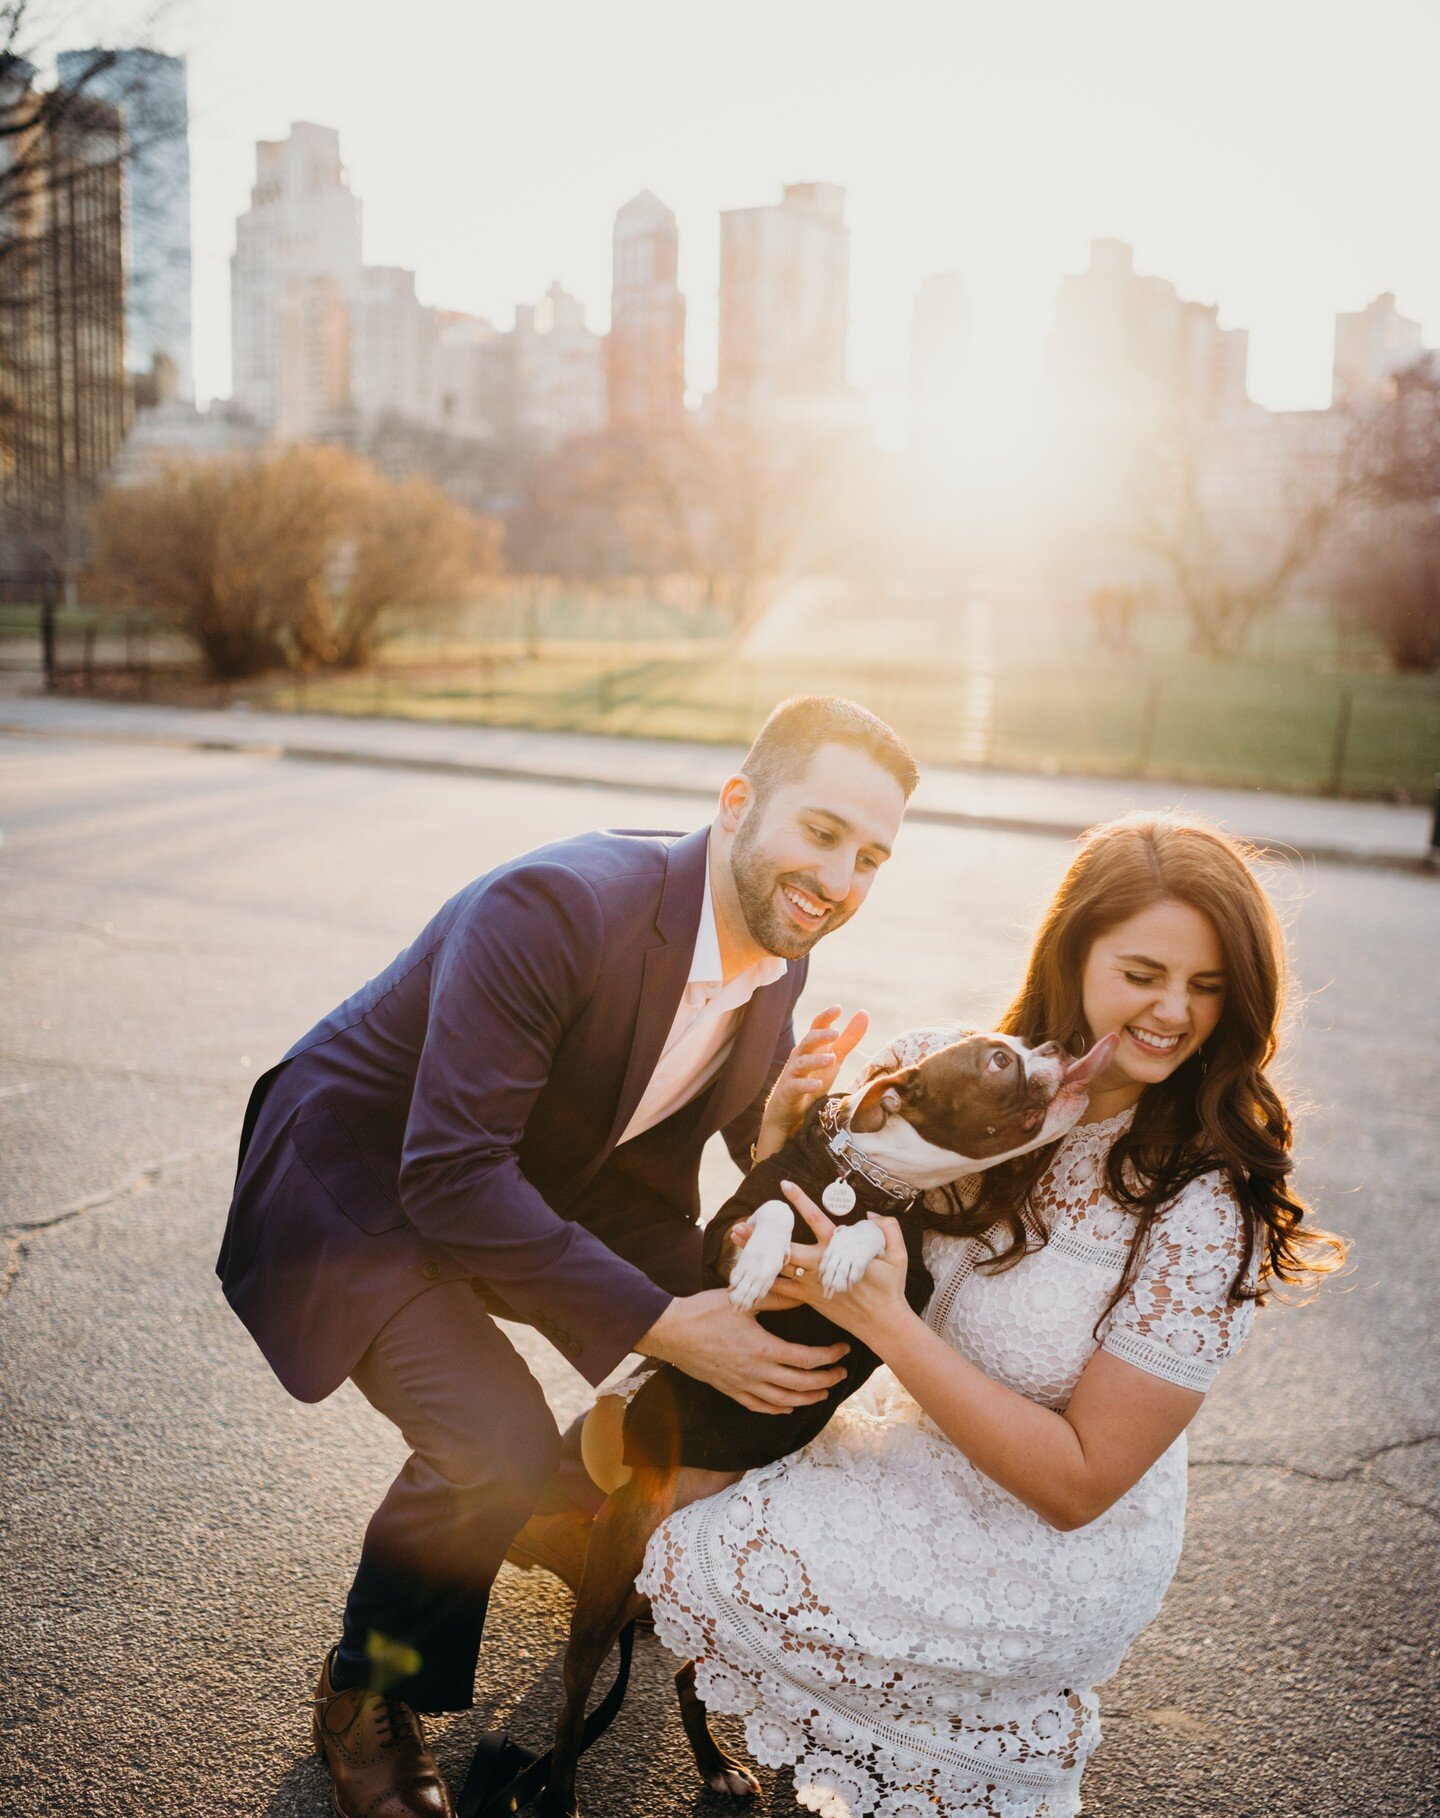 ☀️ Seattle's sun is shining bright this week, and we're ready for warmer days ahead!

Ready to capture your love story with your furry best friend this spring and summer? 📸 Contact us to include your pup in your engagement photos! 🐶💍
.
.
.
#seattl